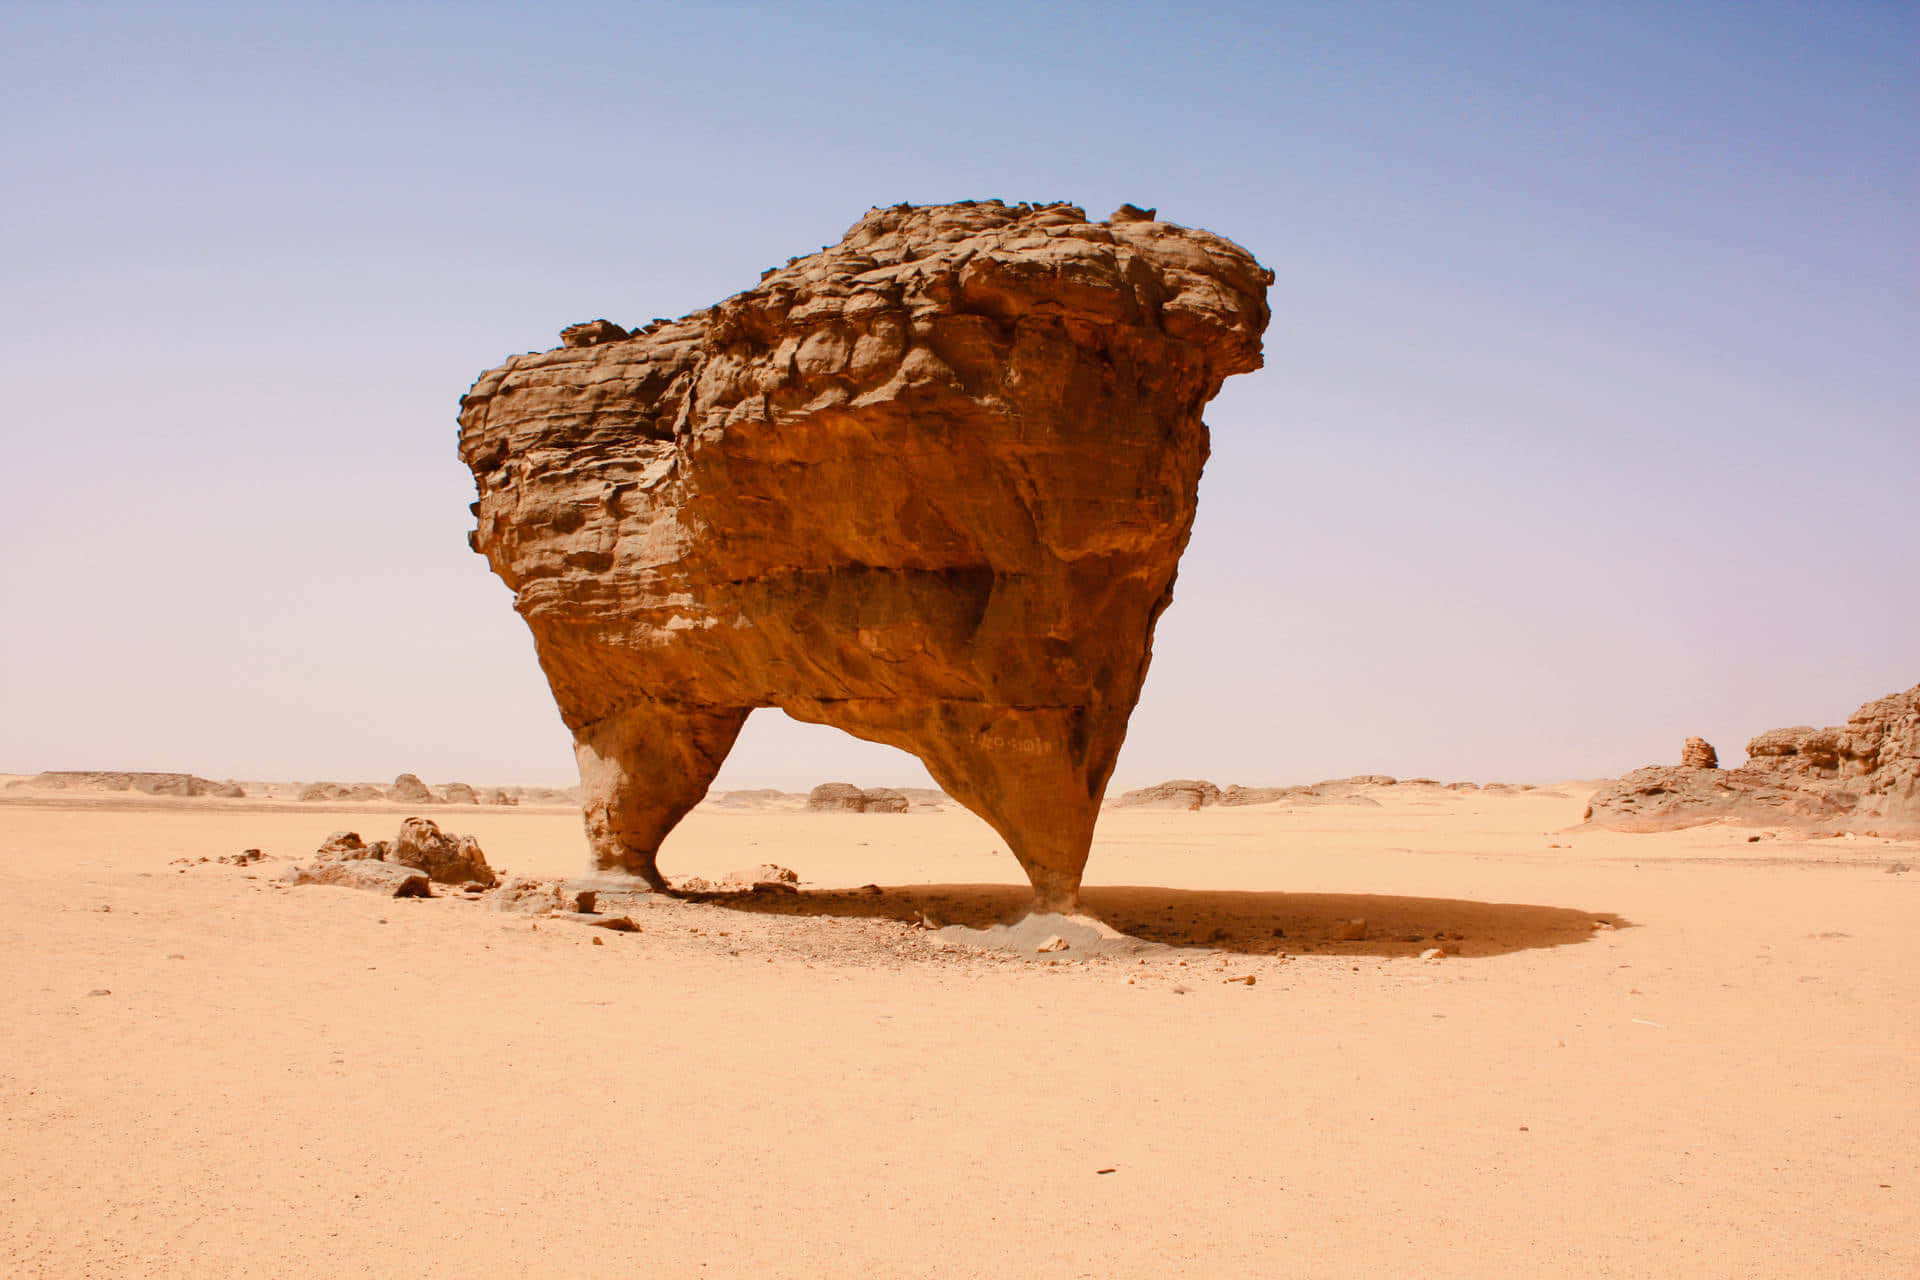 A Rock Formation In The Desert